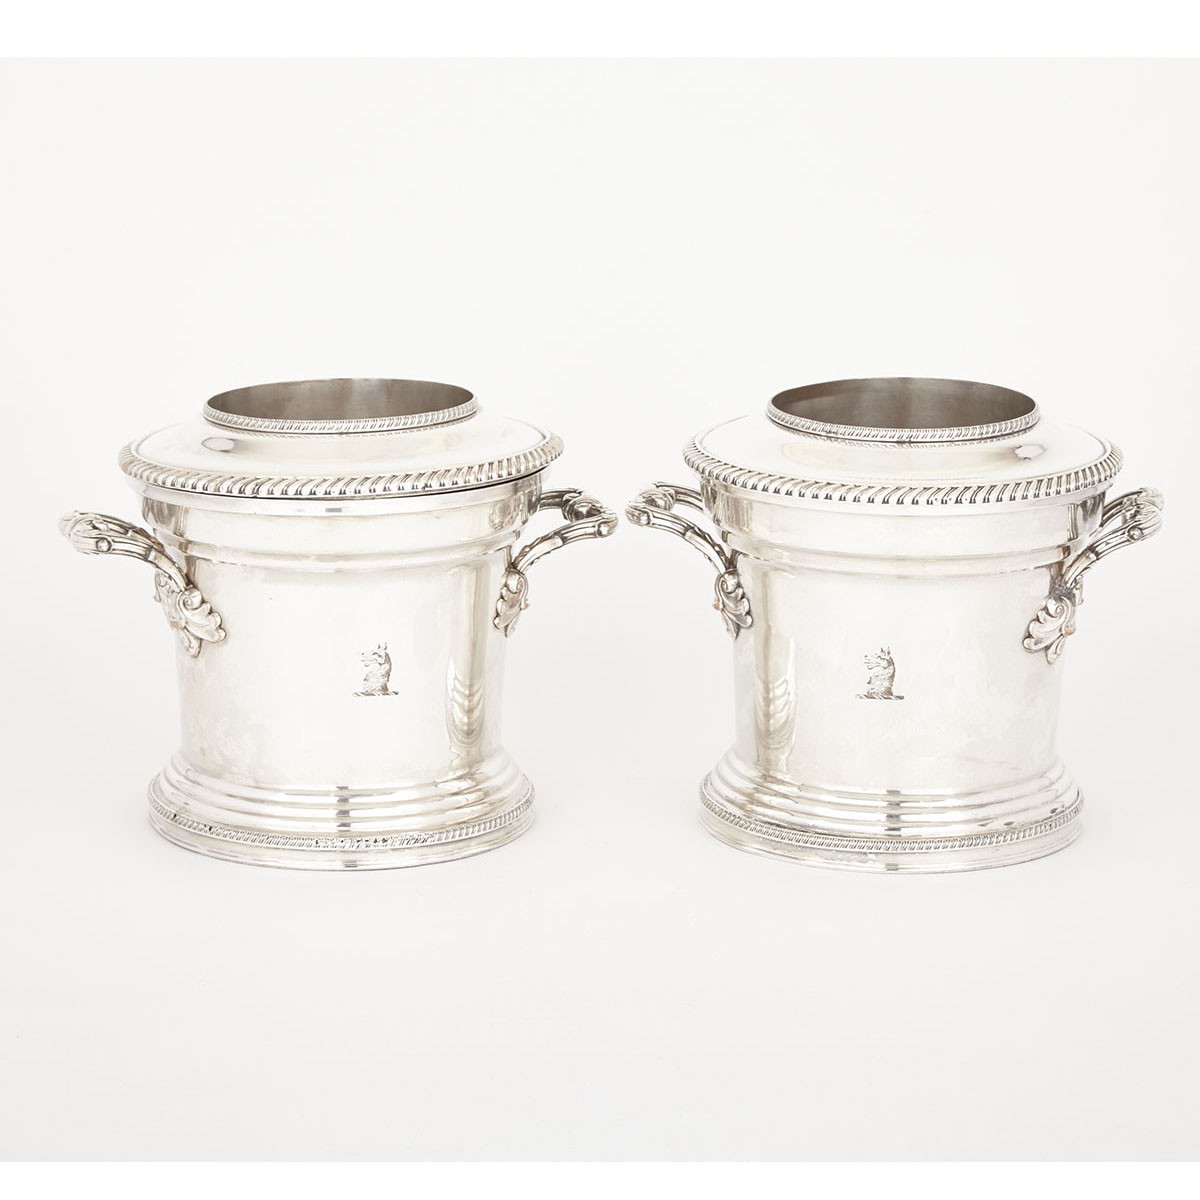 Pair of Old Sheffield Plate Wine Coolers, c.1825